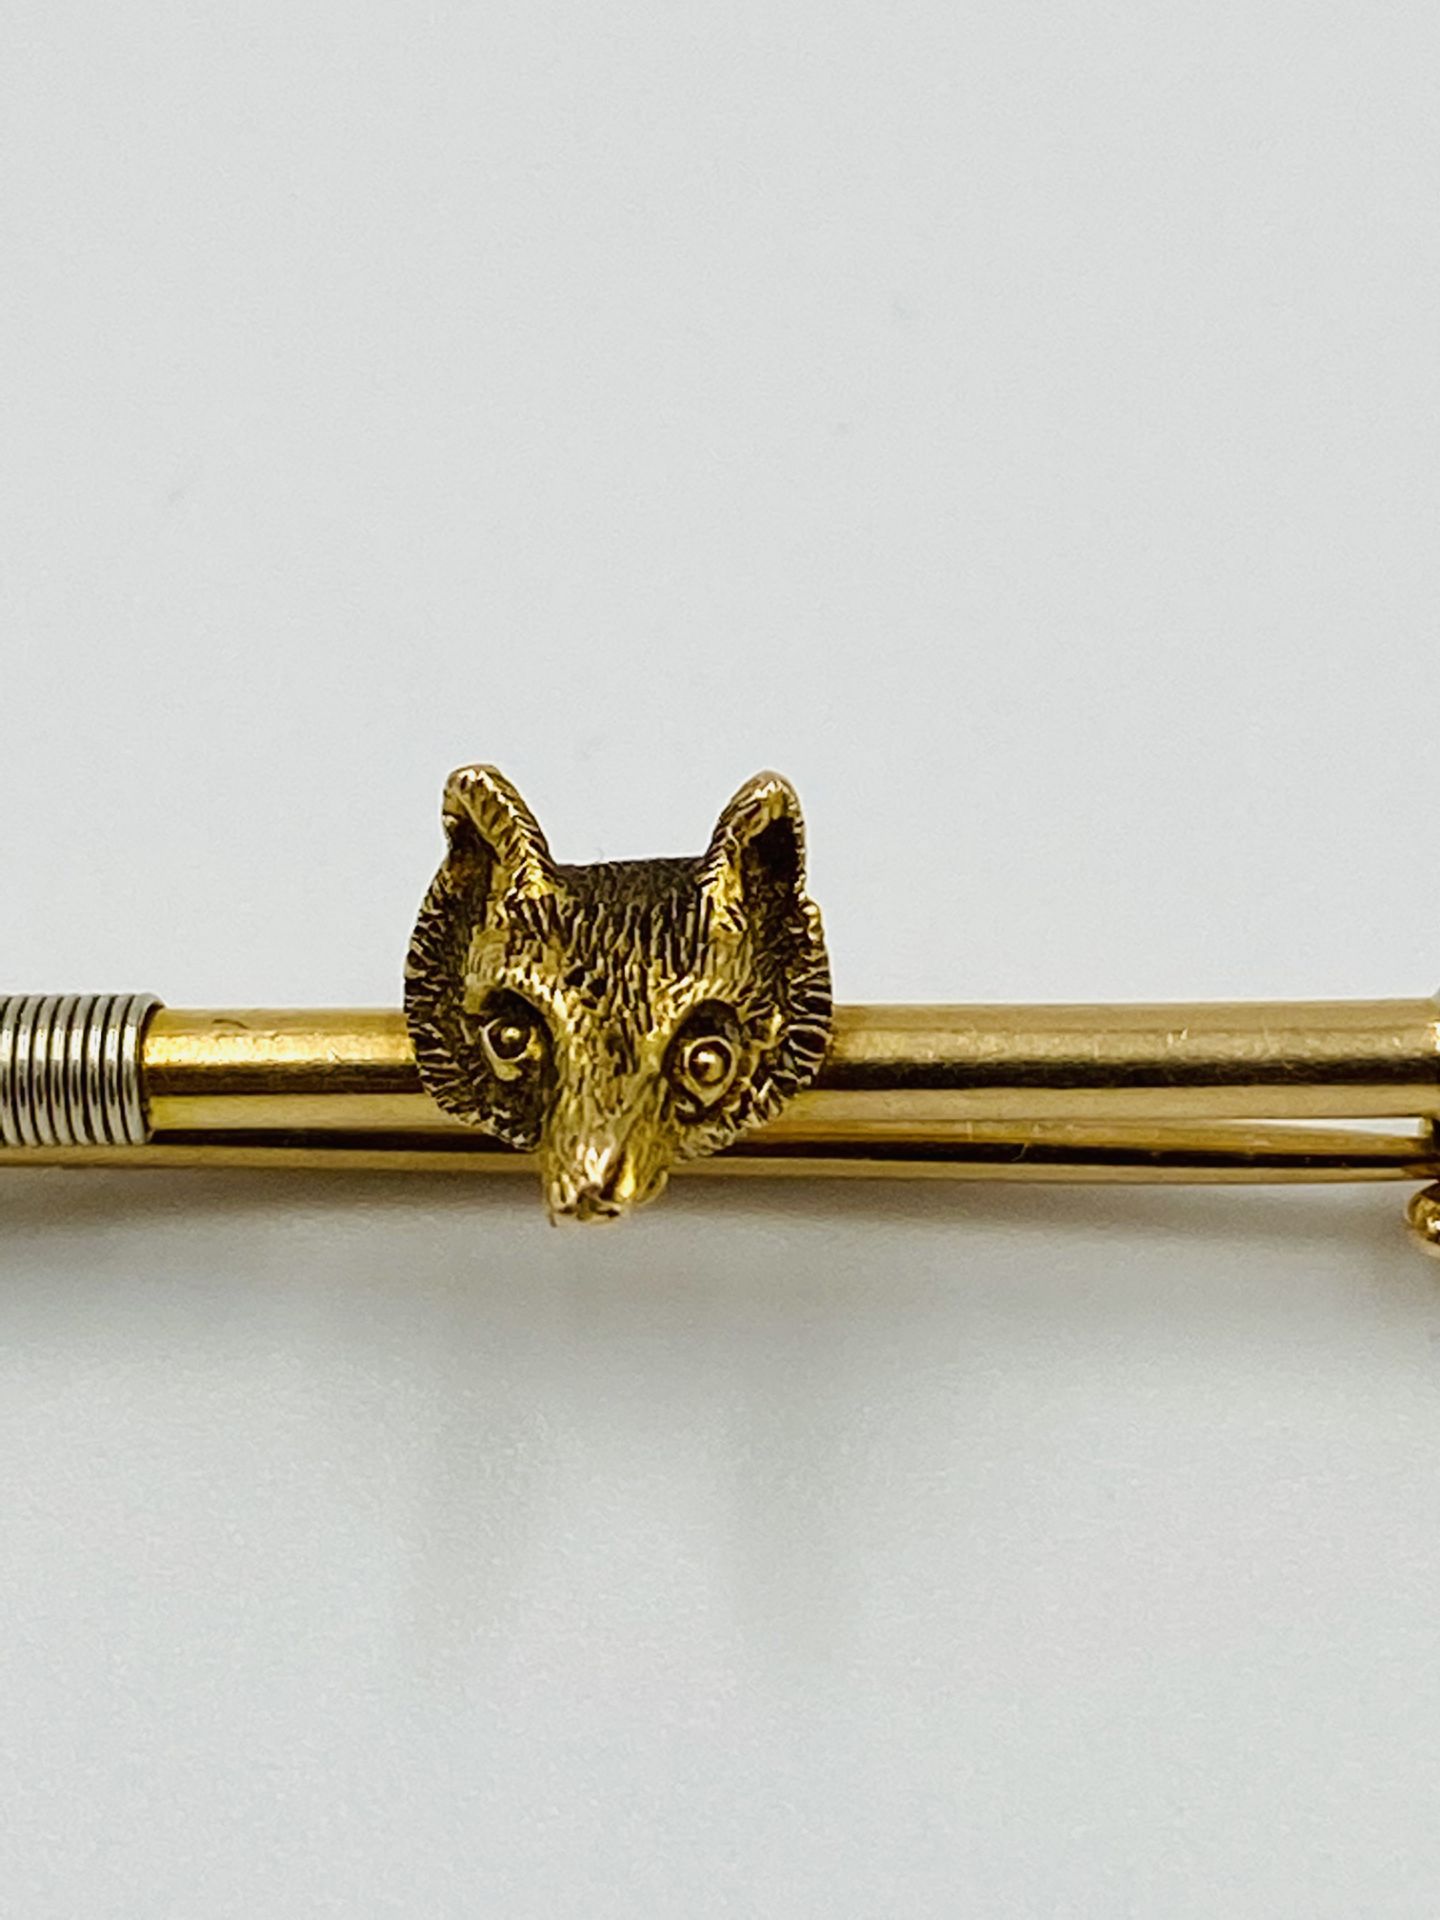 15ct gold fox riding crop pin brooch 4.9g - Image 2 of 4